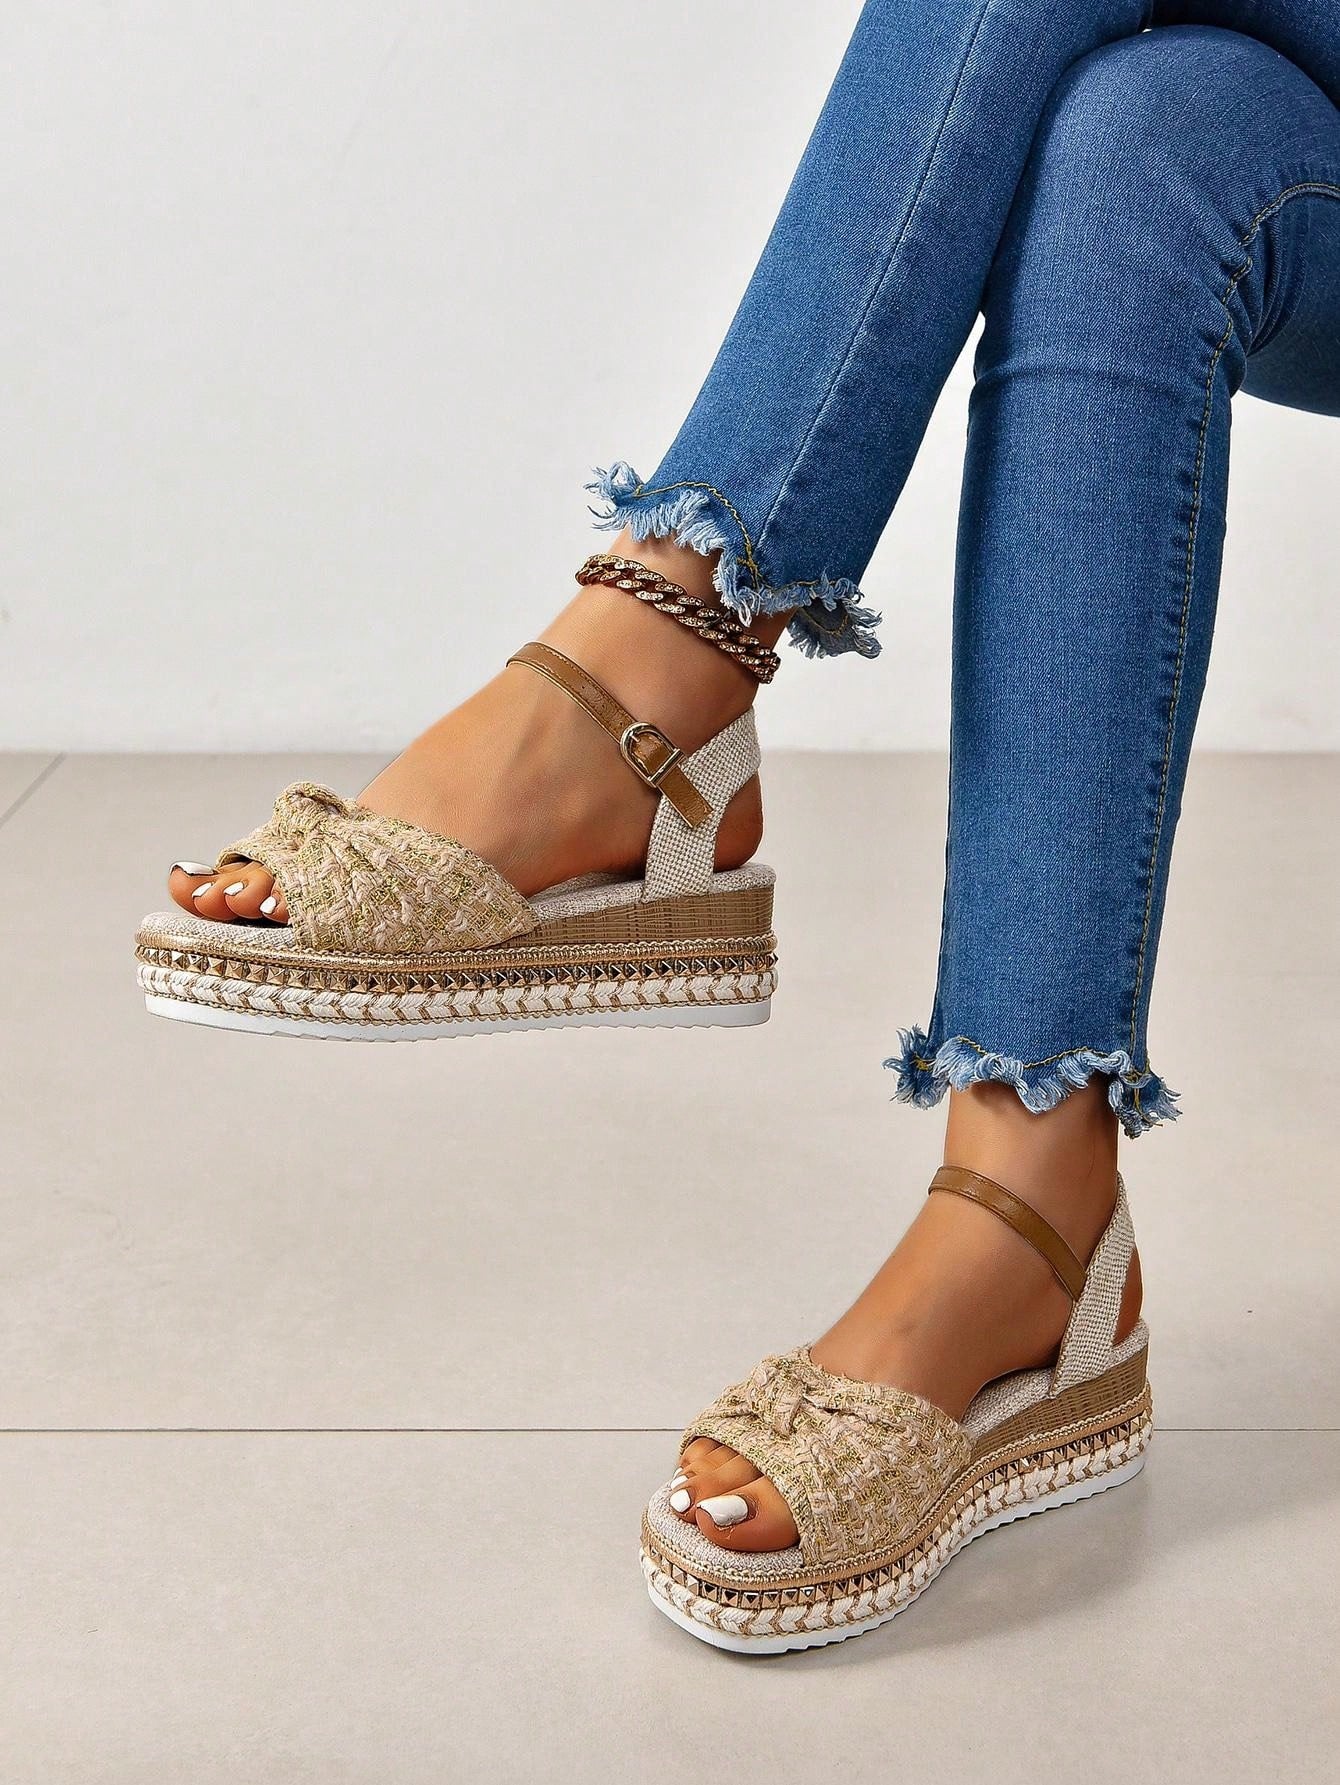 Fashionable Platform Knot Sandals, Stud and Rope Detail: Chic and Comfortable Fit